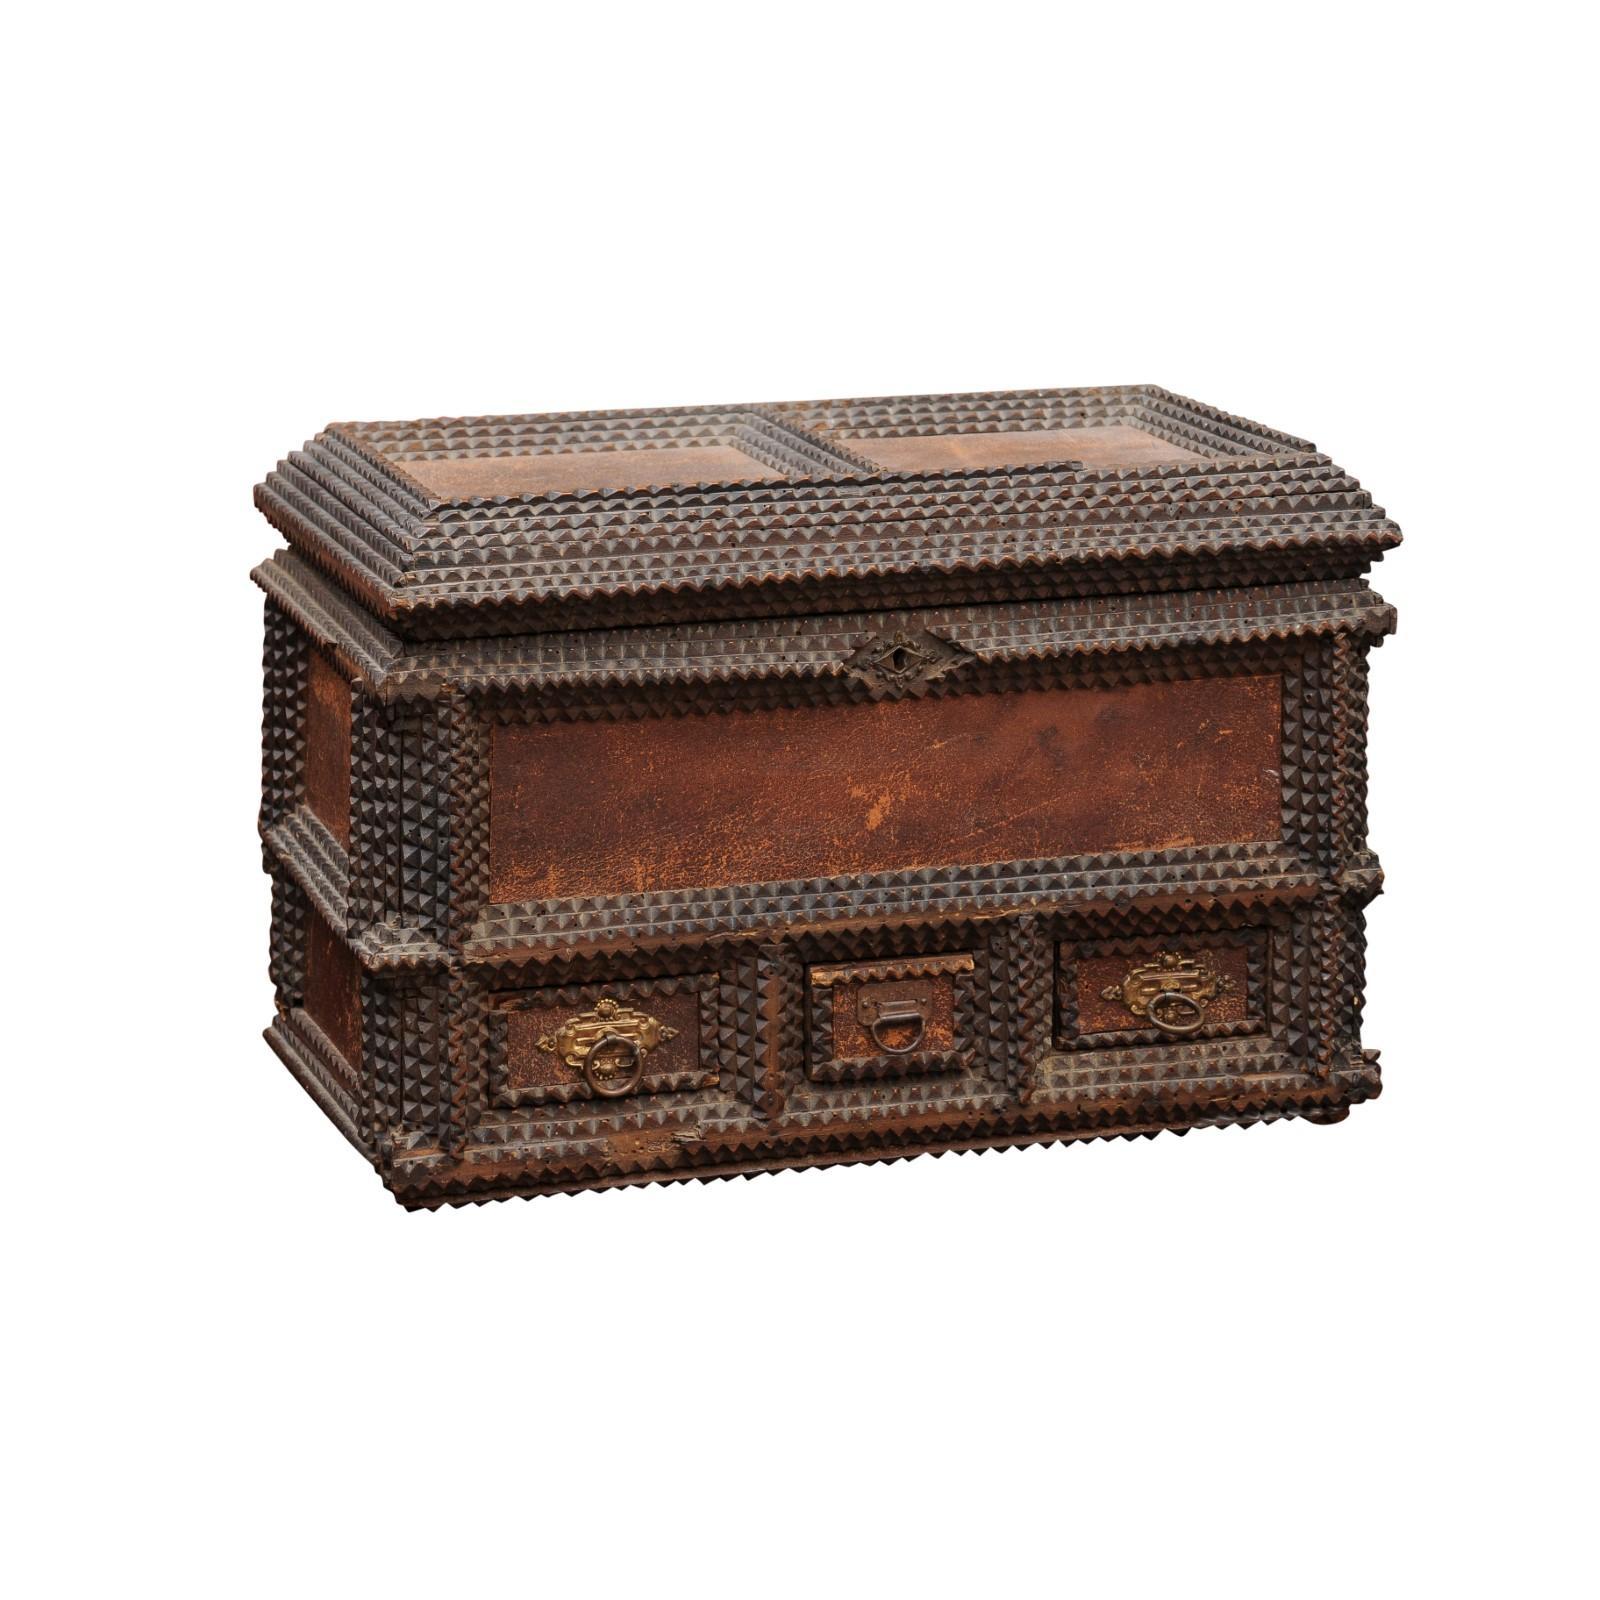 Tramp Art Dresser Box with Leather Panels, Signed ca. 1900 In Good Condition For Sale In Atlanta, GA